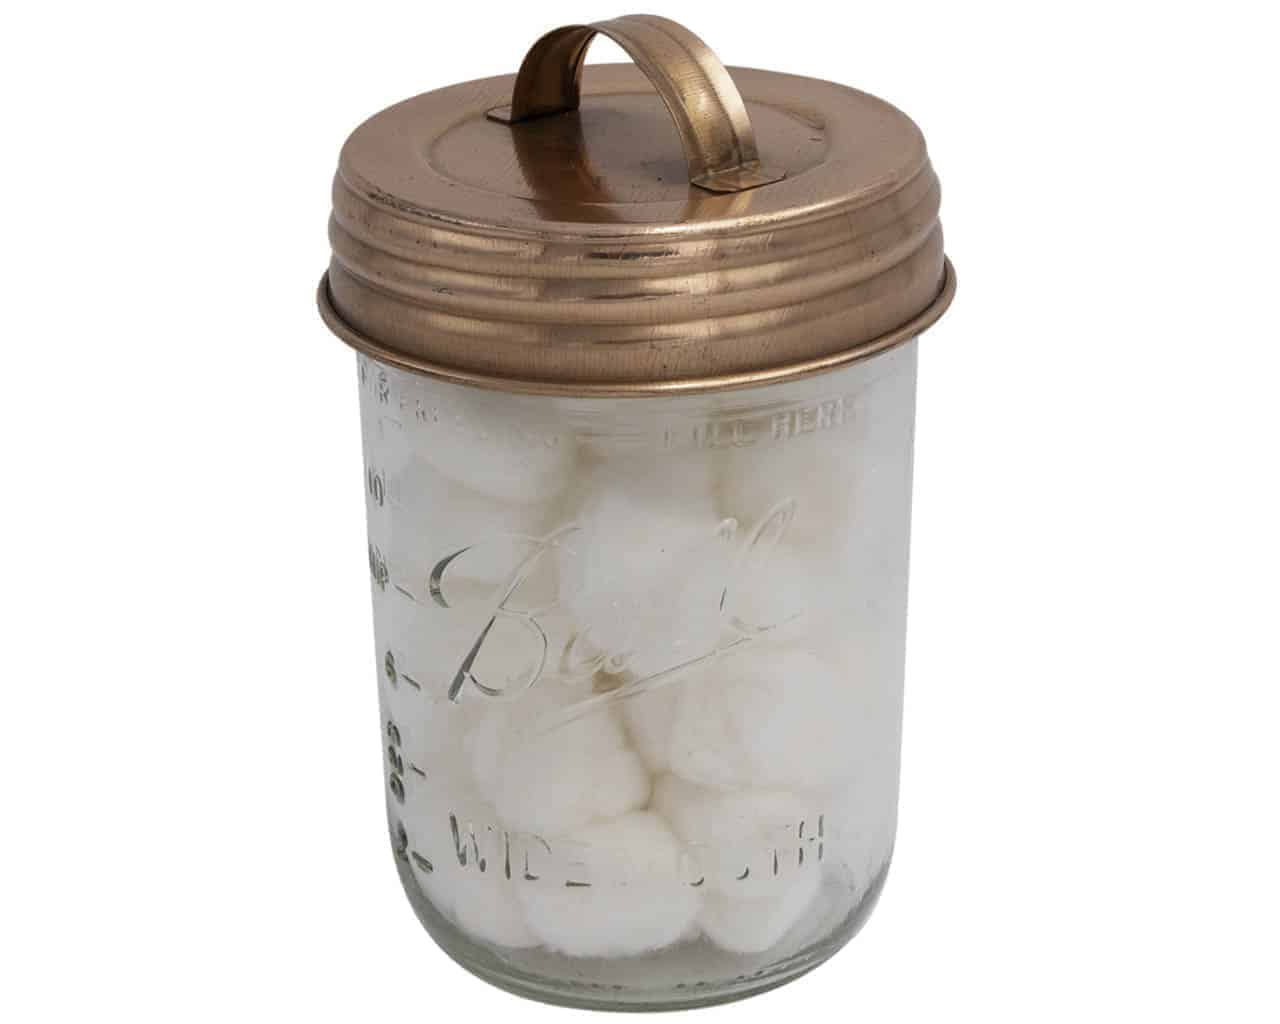 mason-jar-lifestyle-shiny-copper-handle-canister-lid-wide-mouth-ball-pint-jar-cotton-balls